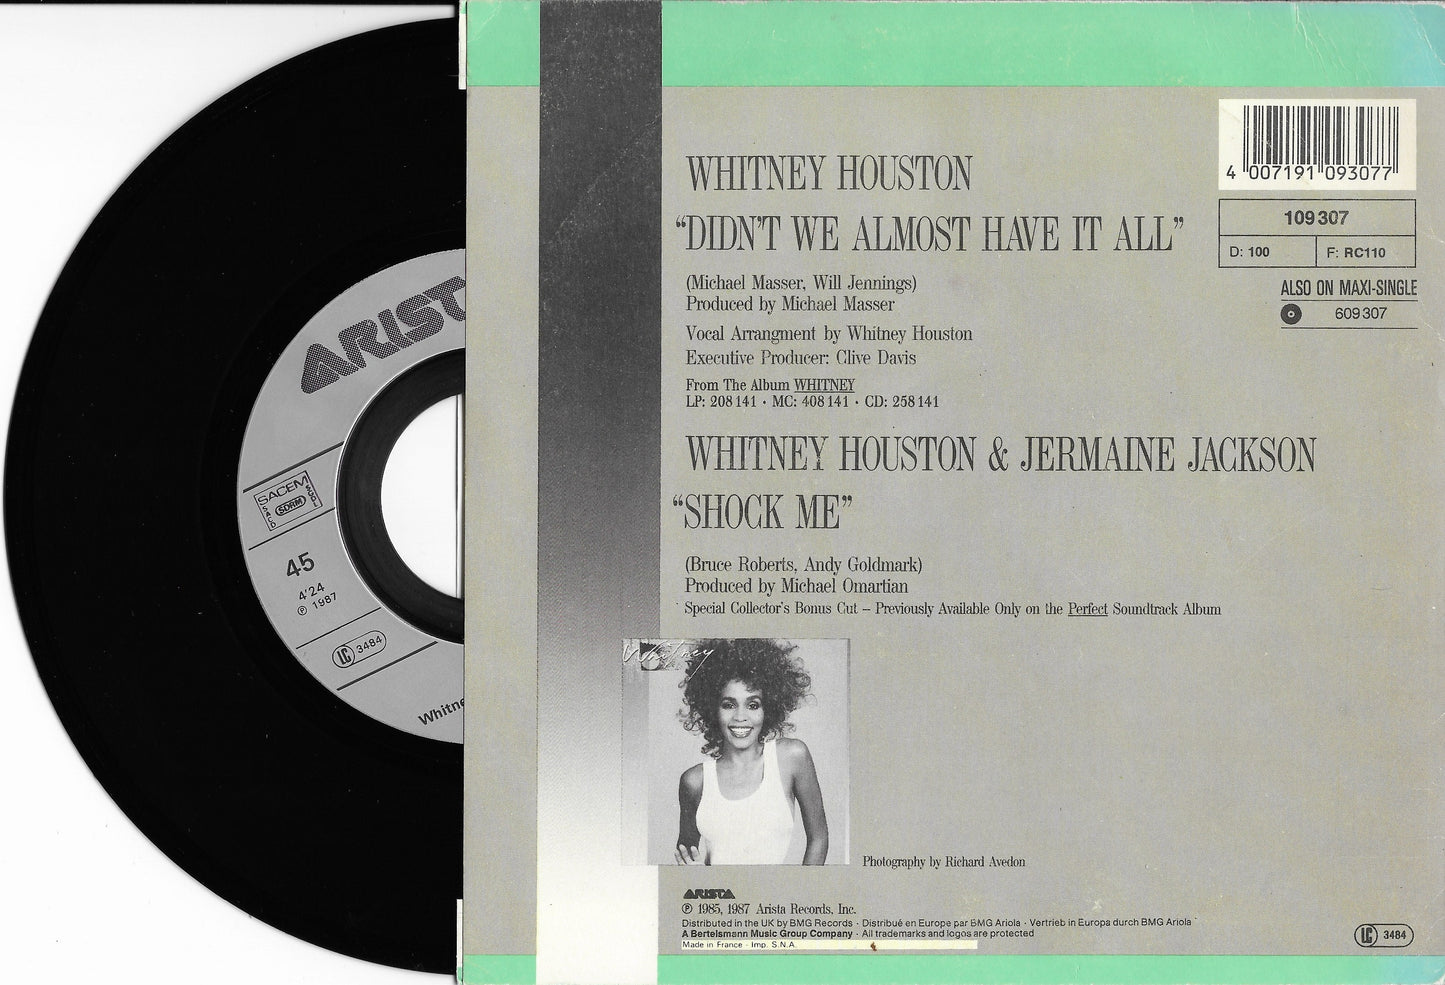 WHITNEY HOUSTON - Didn't We Almost Have It All